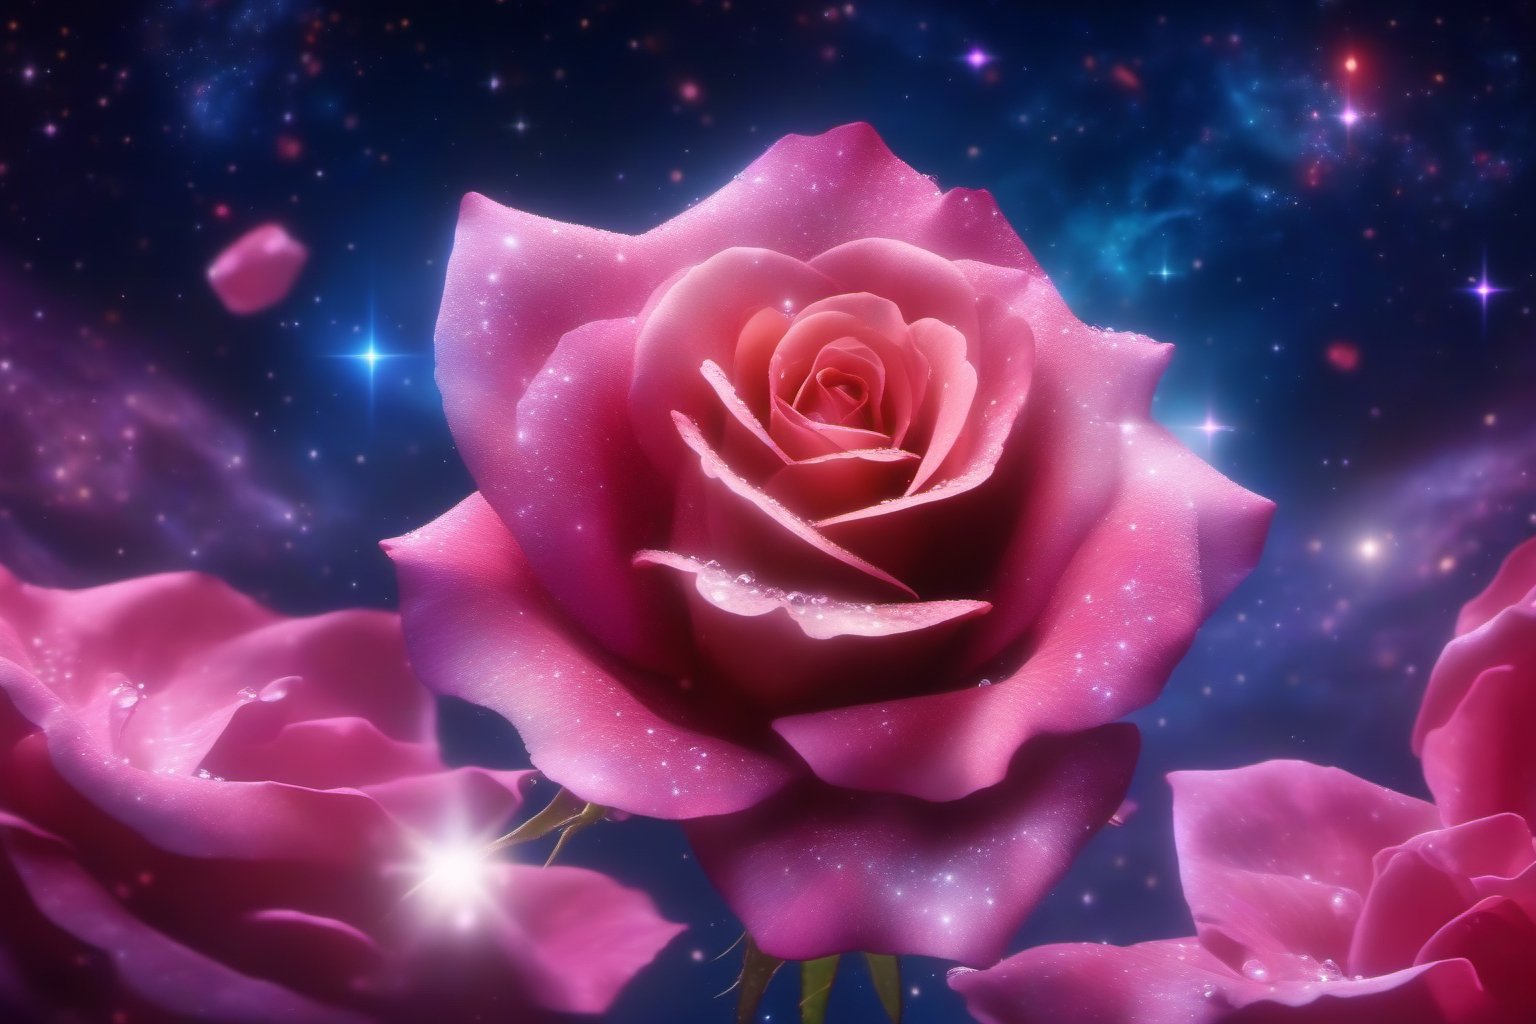  a galaxy rose with a galaxy on each rose petal, shining starlight, spacey nebula  background, Dark background,Extreme Detail,UHD,8K,water droplets on rose petal,